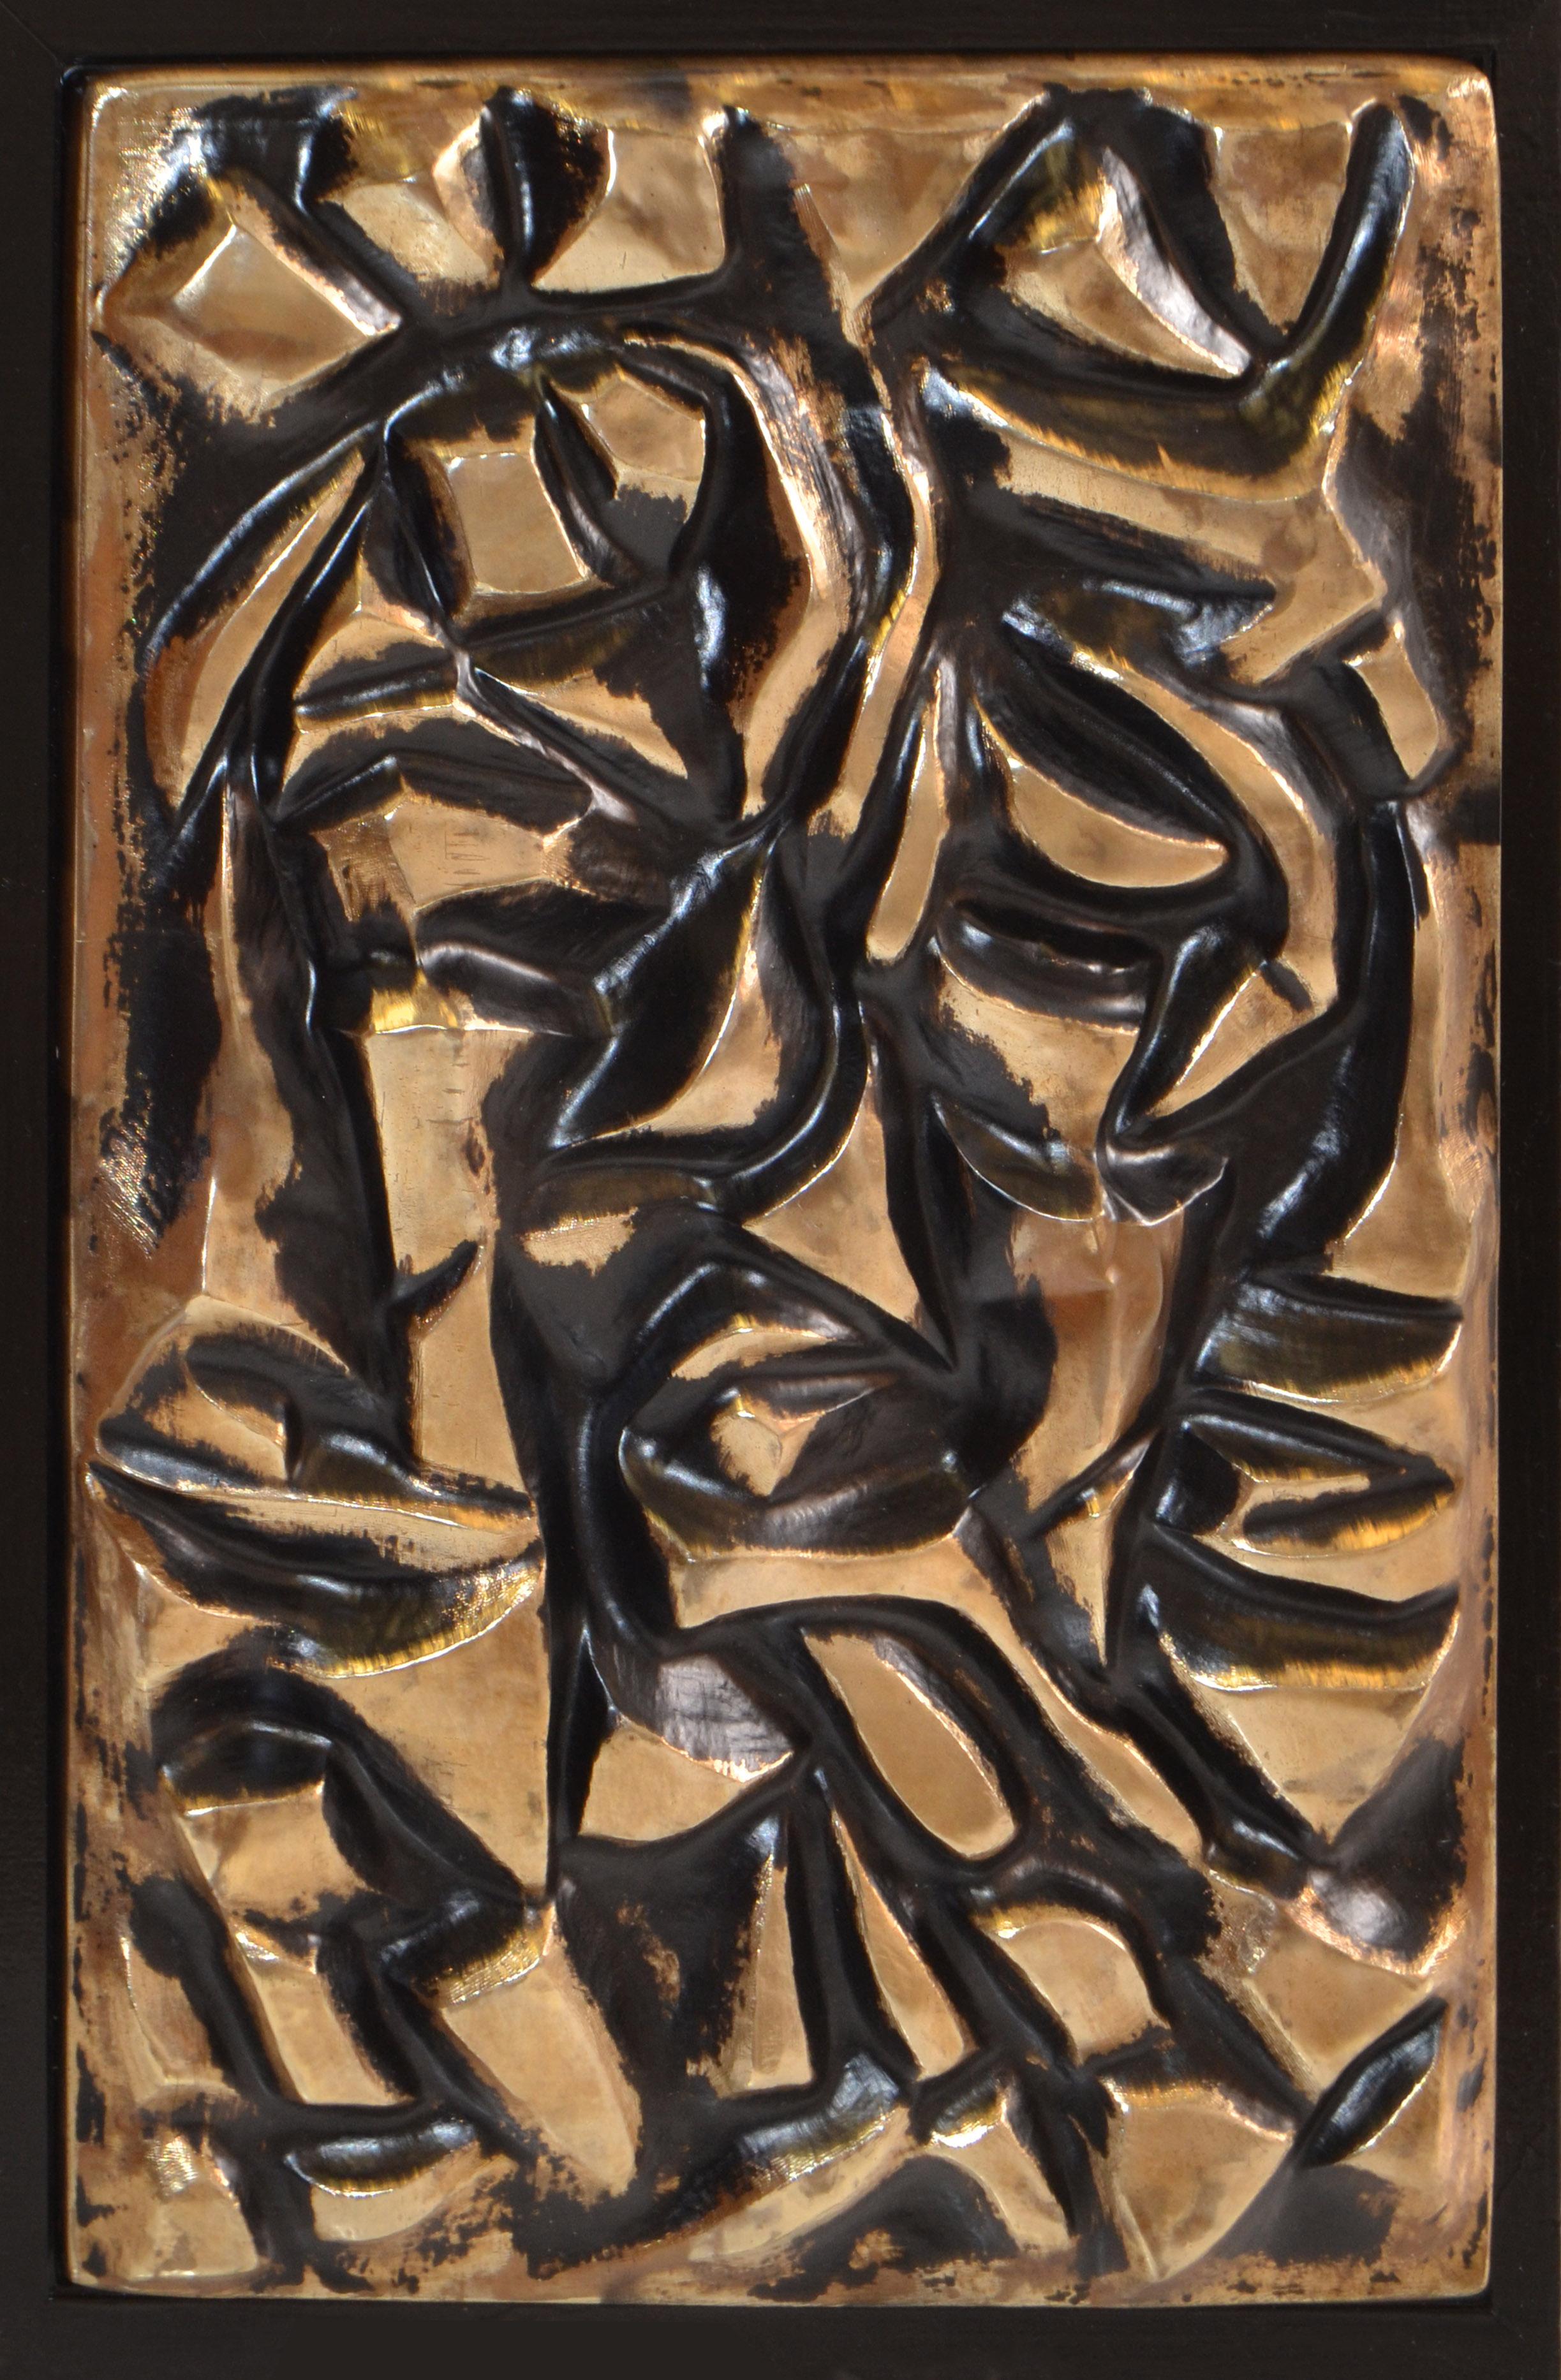 Incredible artistic abstract fiberglass sculpted Fine Art in Black and Gold, that can be wall mounted.
The Sculpture is framed in Black Wood and can be hung vertical.
No Signature found.
Art Size measures: 12.5 x 19.5 inches.